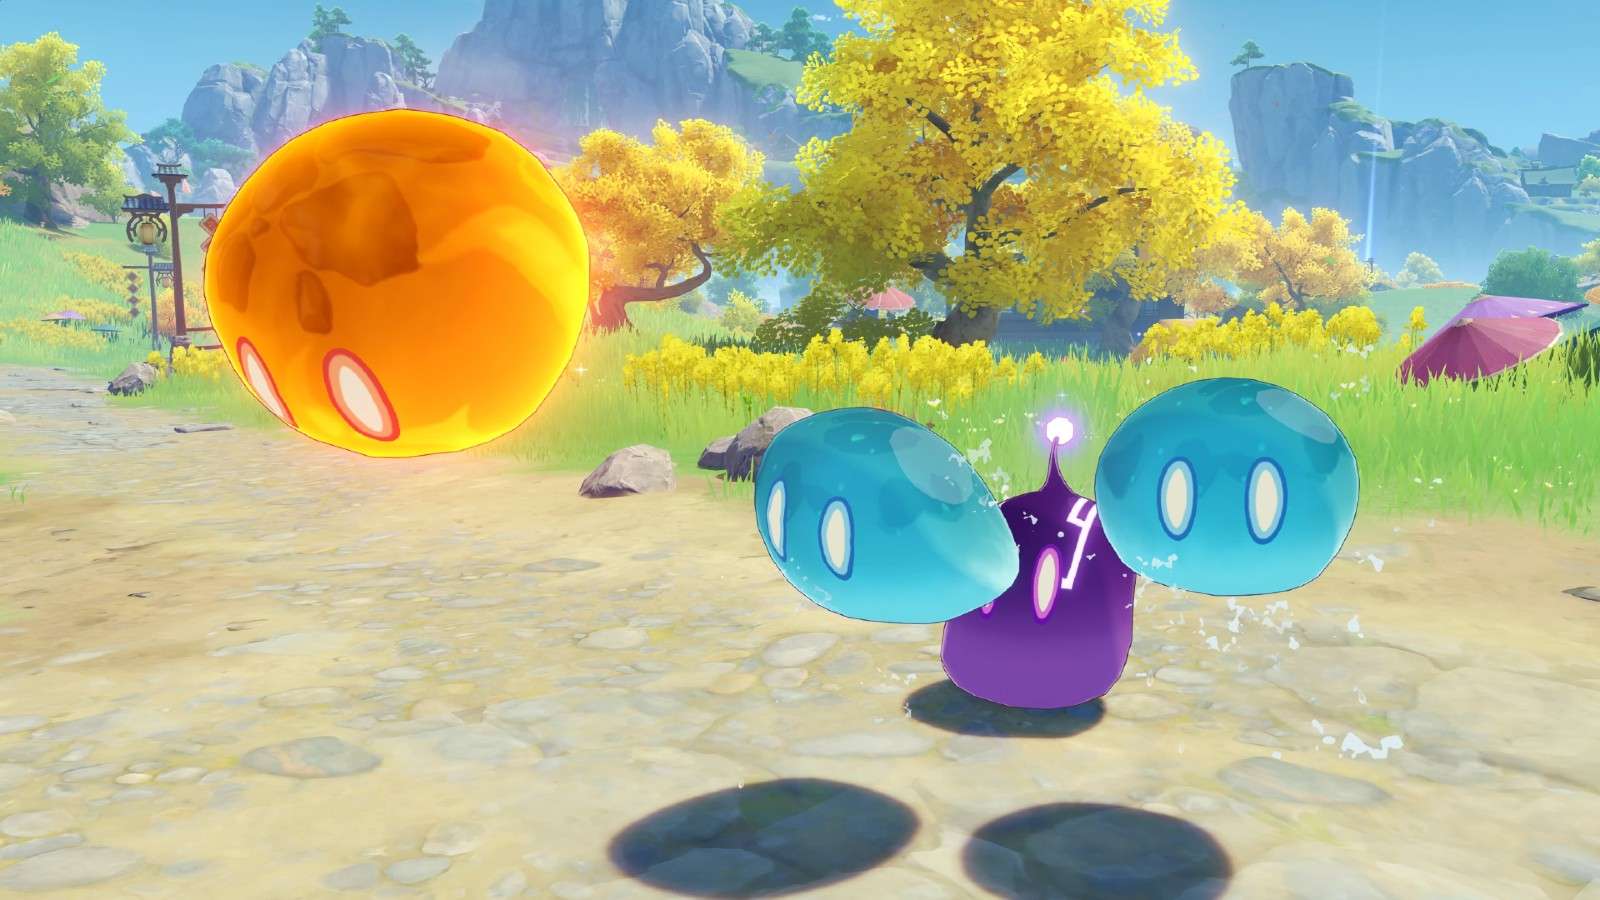 An image of Slimes in Genshin Impact who you can get Slime Secretions from.